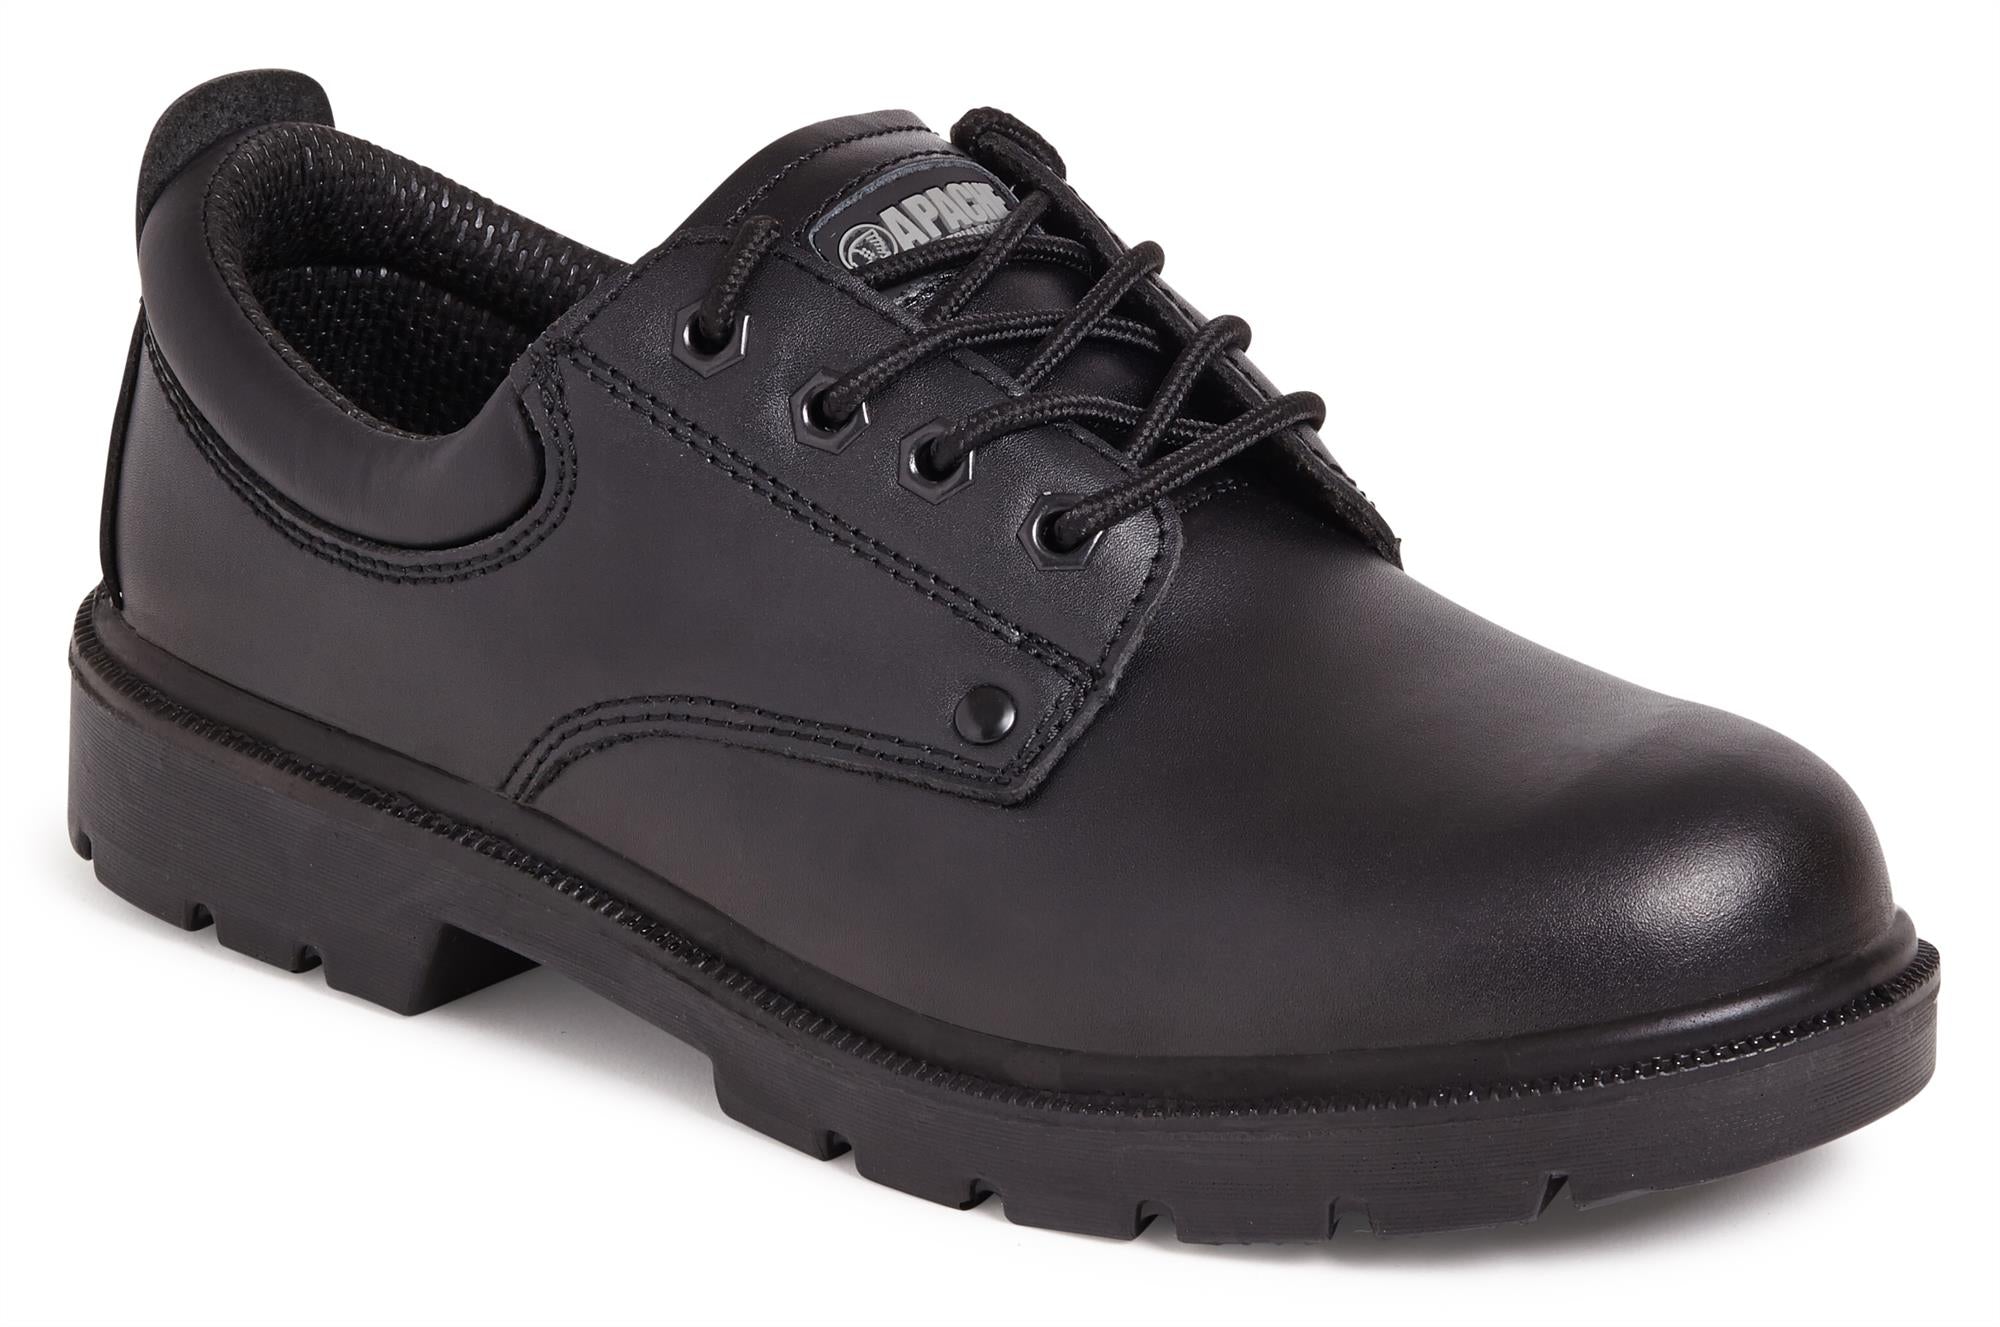 Apache AP306 S3 black leather water-resistant steel toe/midsole safety shoe